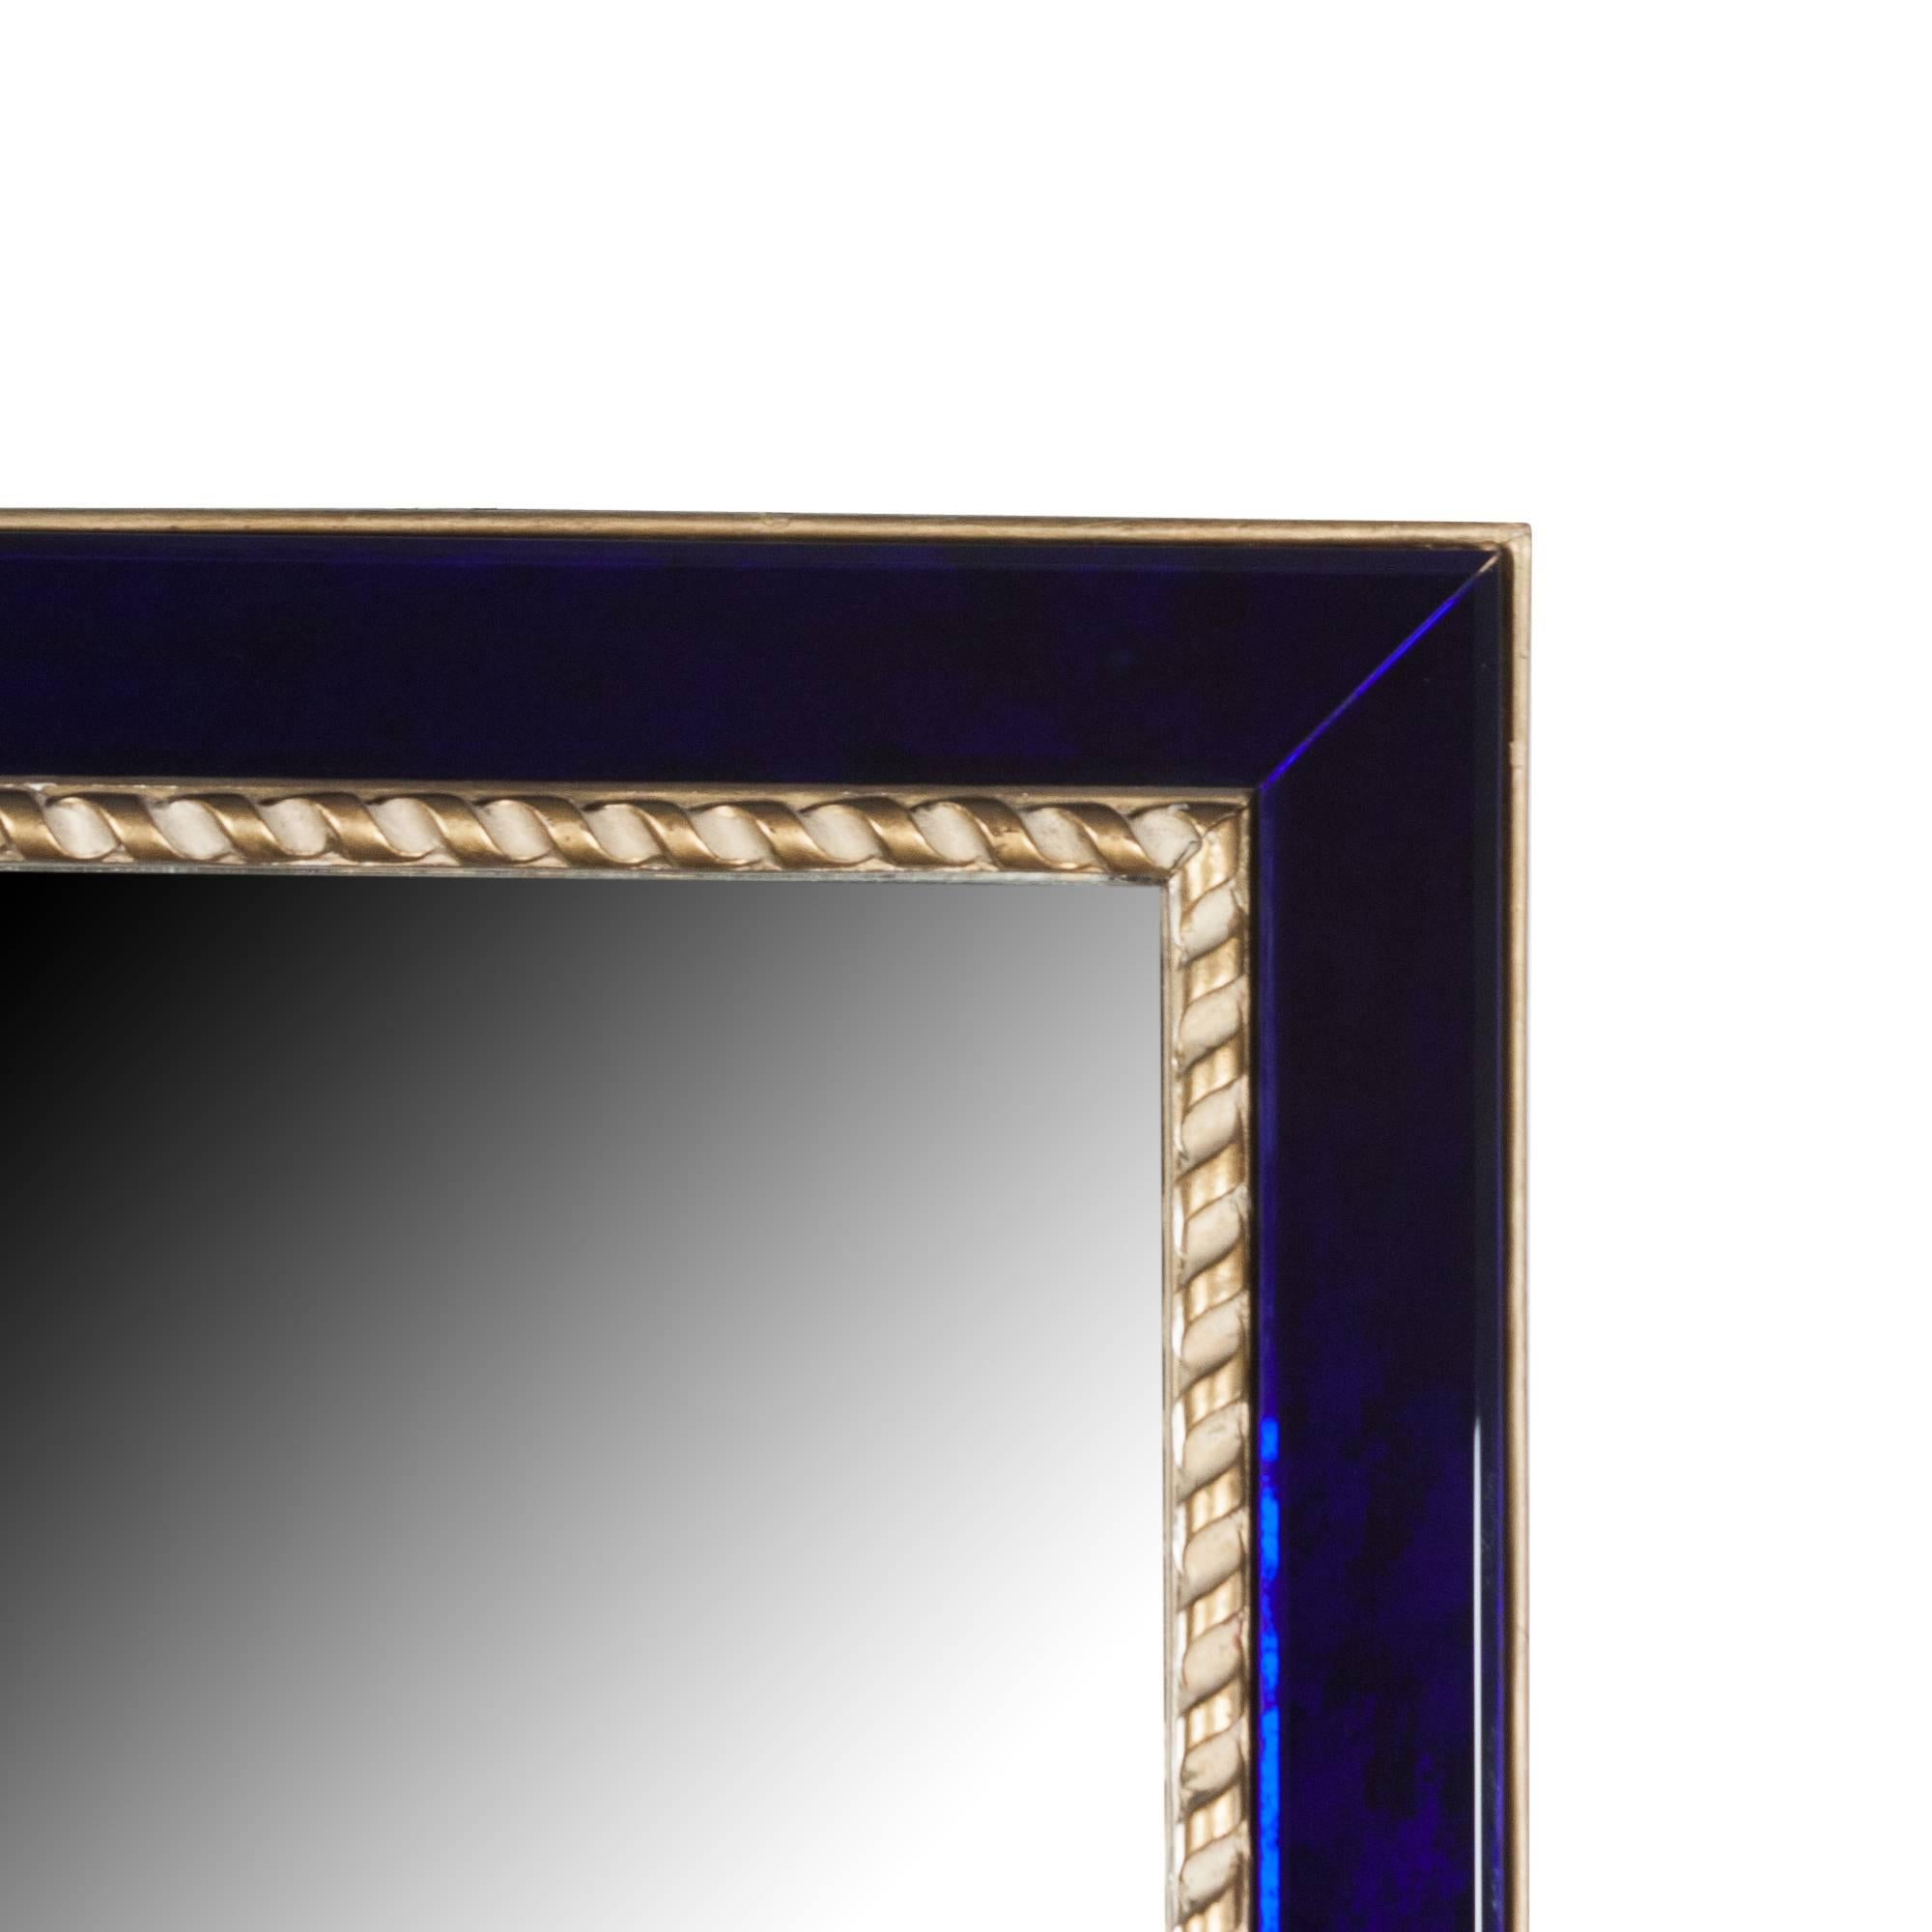 Rectangular wall mirror with blue glass frame, giltwood outer frame, and inner frame of rope twist form giltwood, attributed to Pierre Lardin, France, 1940s. Measures: Height 23 1/2 in, width 20 in, depth 1 in.